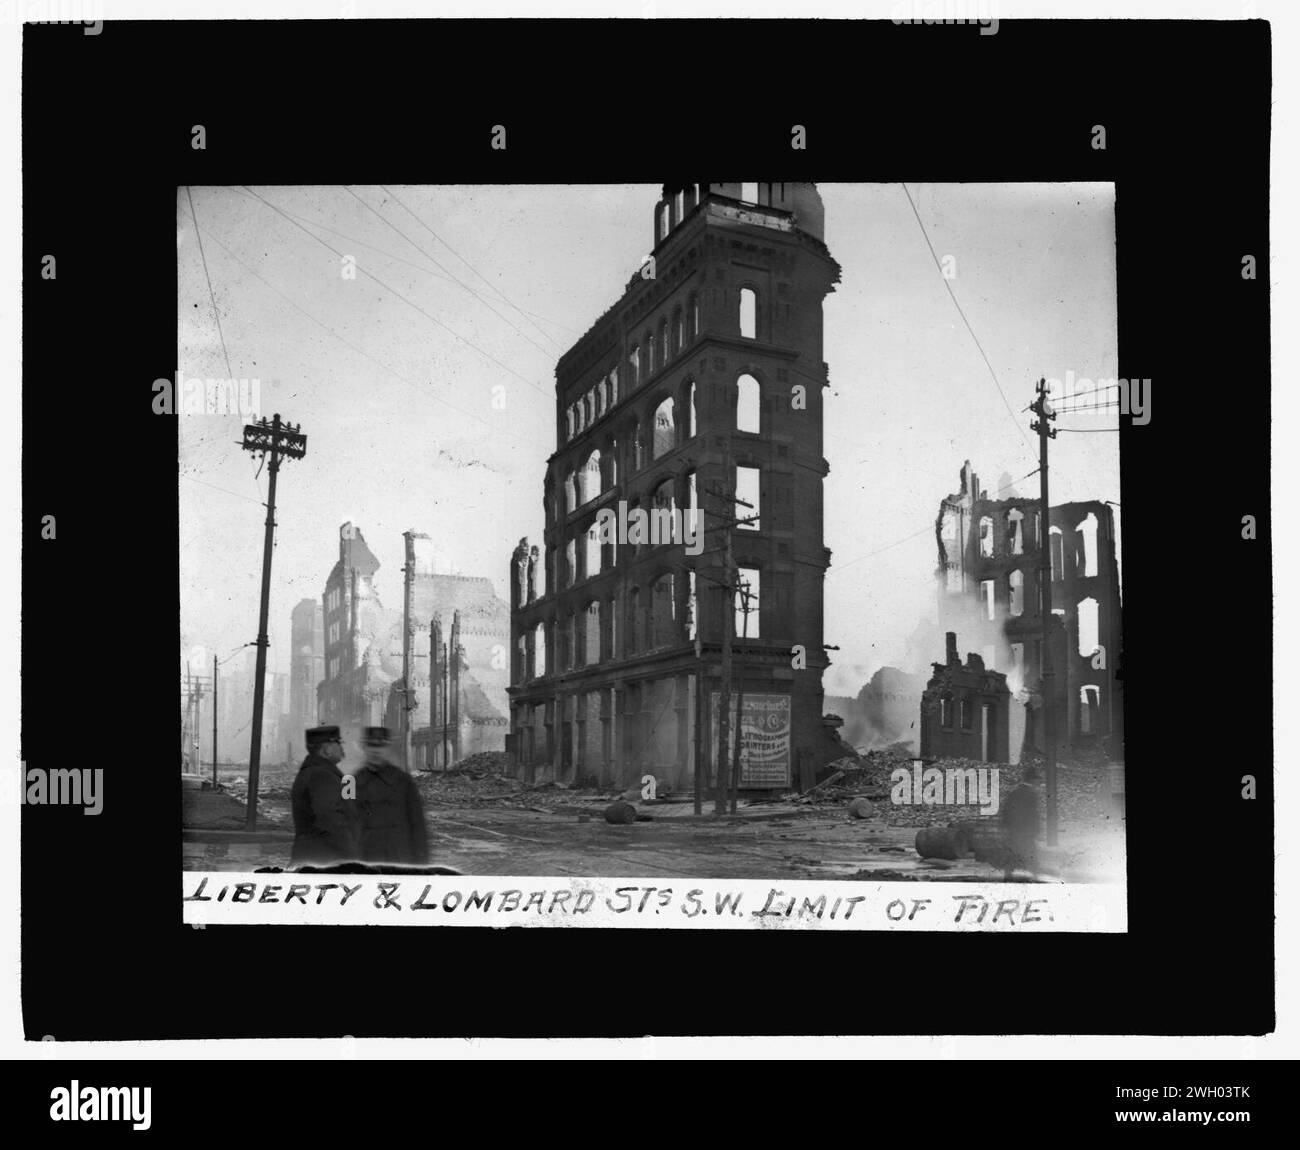 Baltimore fire, 1904) Liberty & Lombard Sts., S.W. limiter d'incendie Banque D'Images